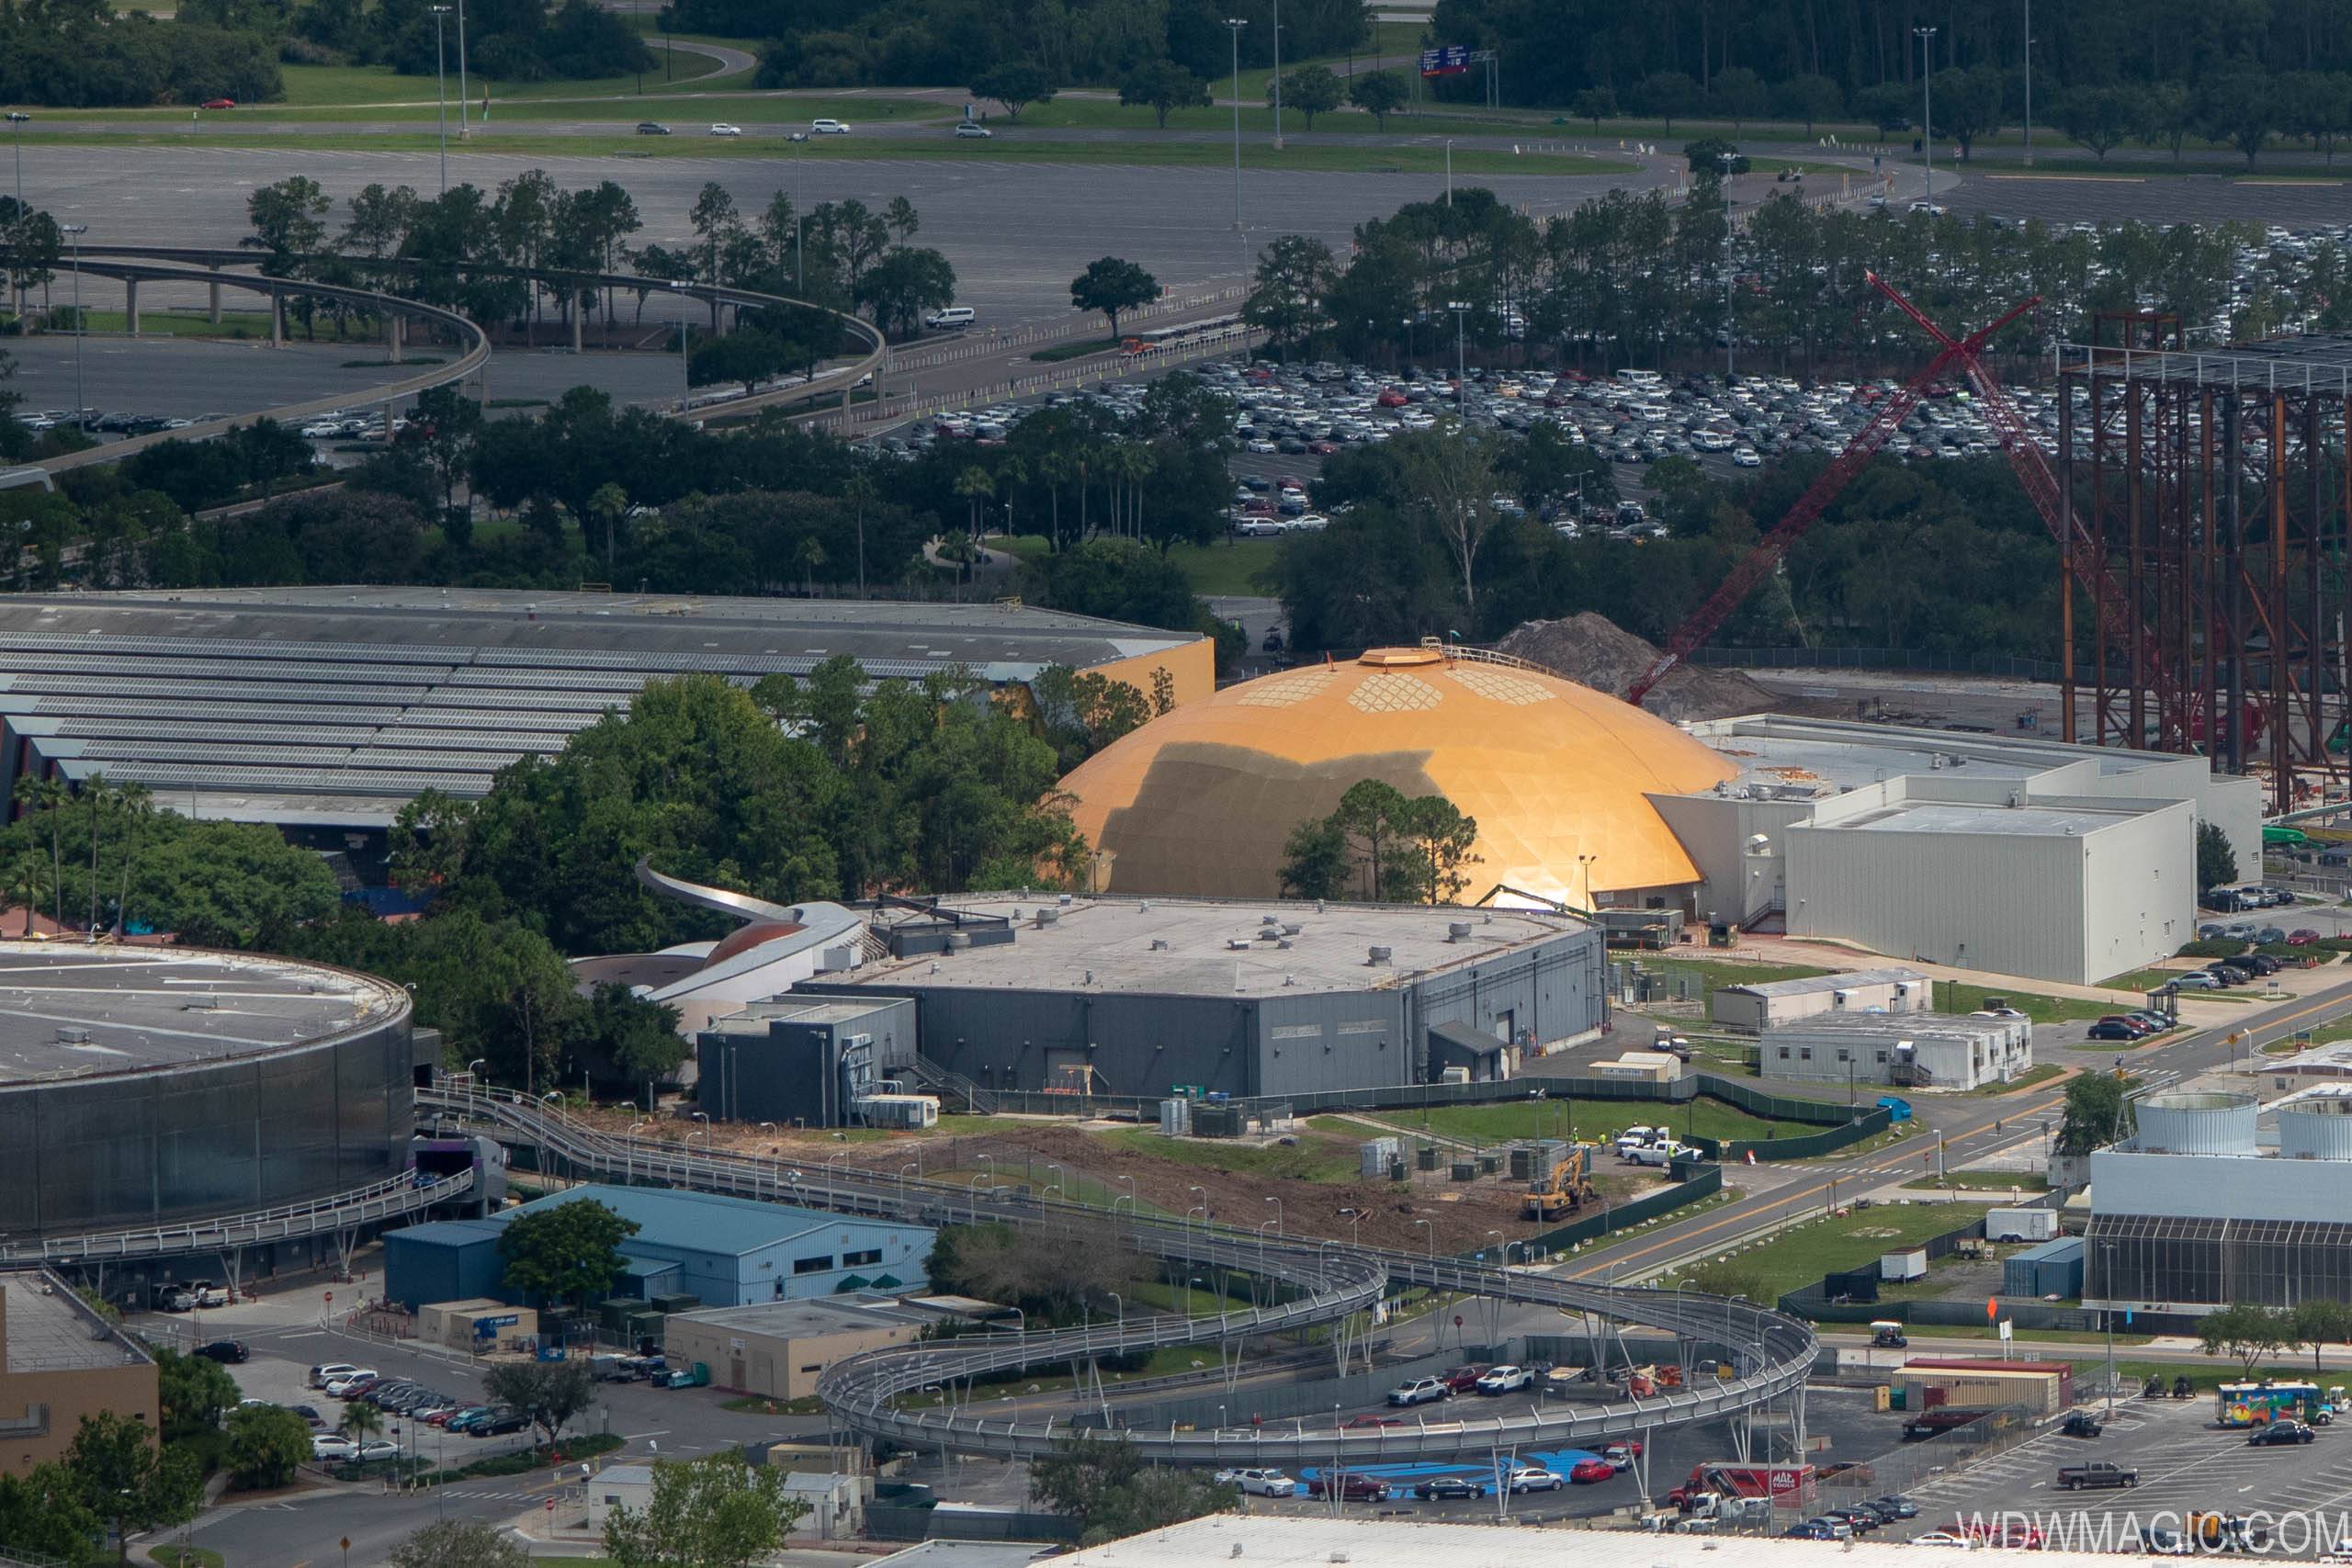 PHOTO - Epcot's Space-themed restaurant ground clearing gets underway